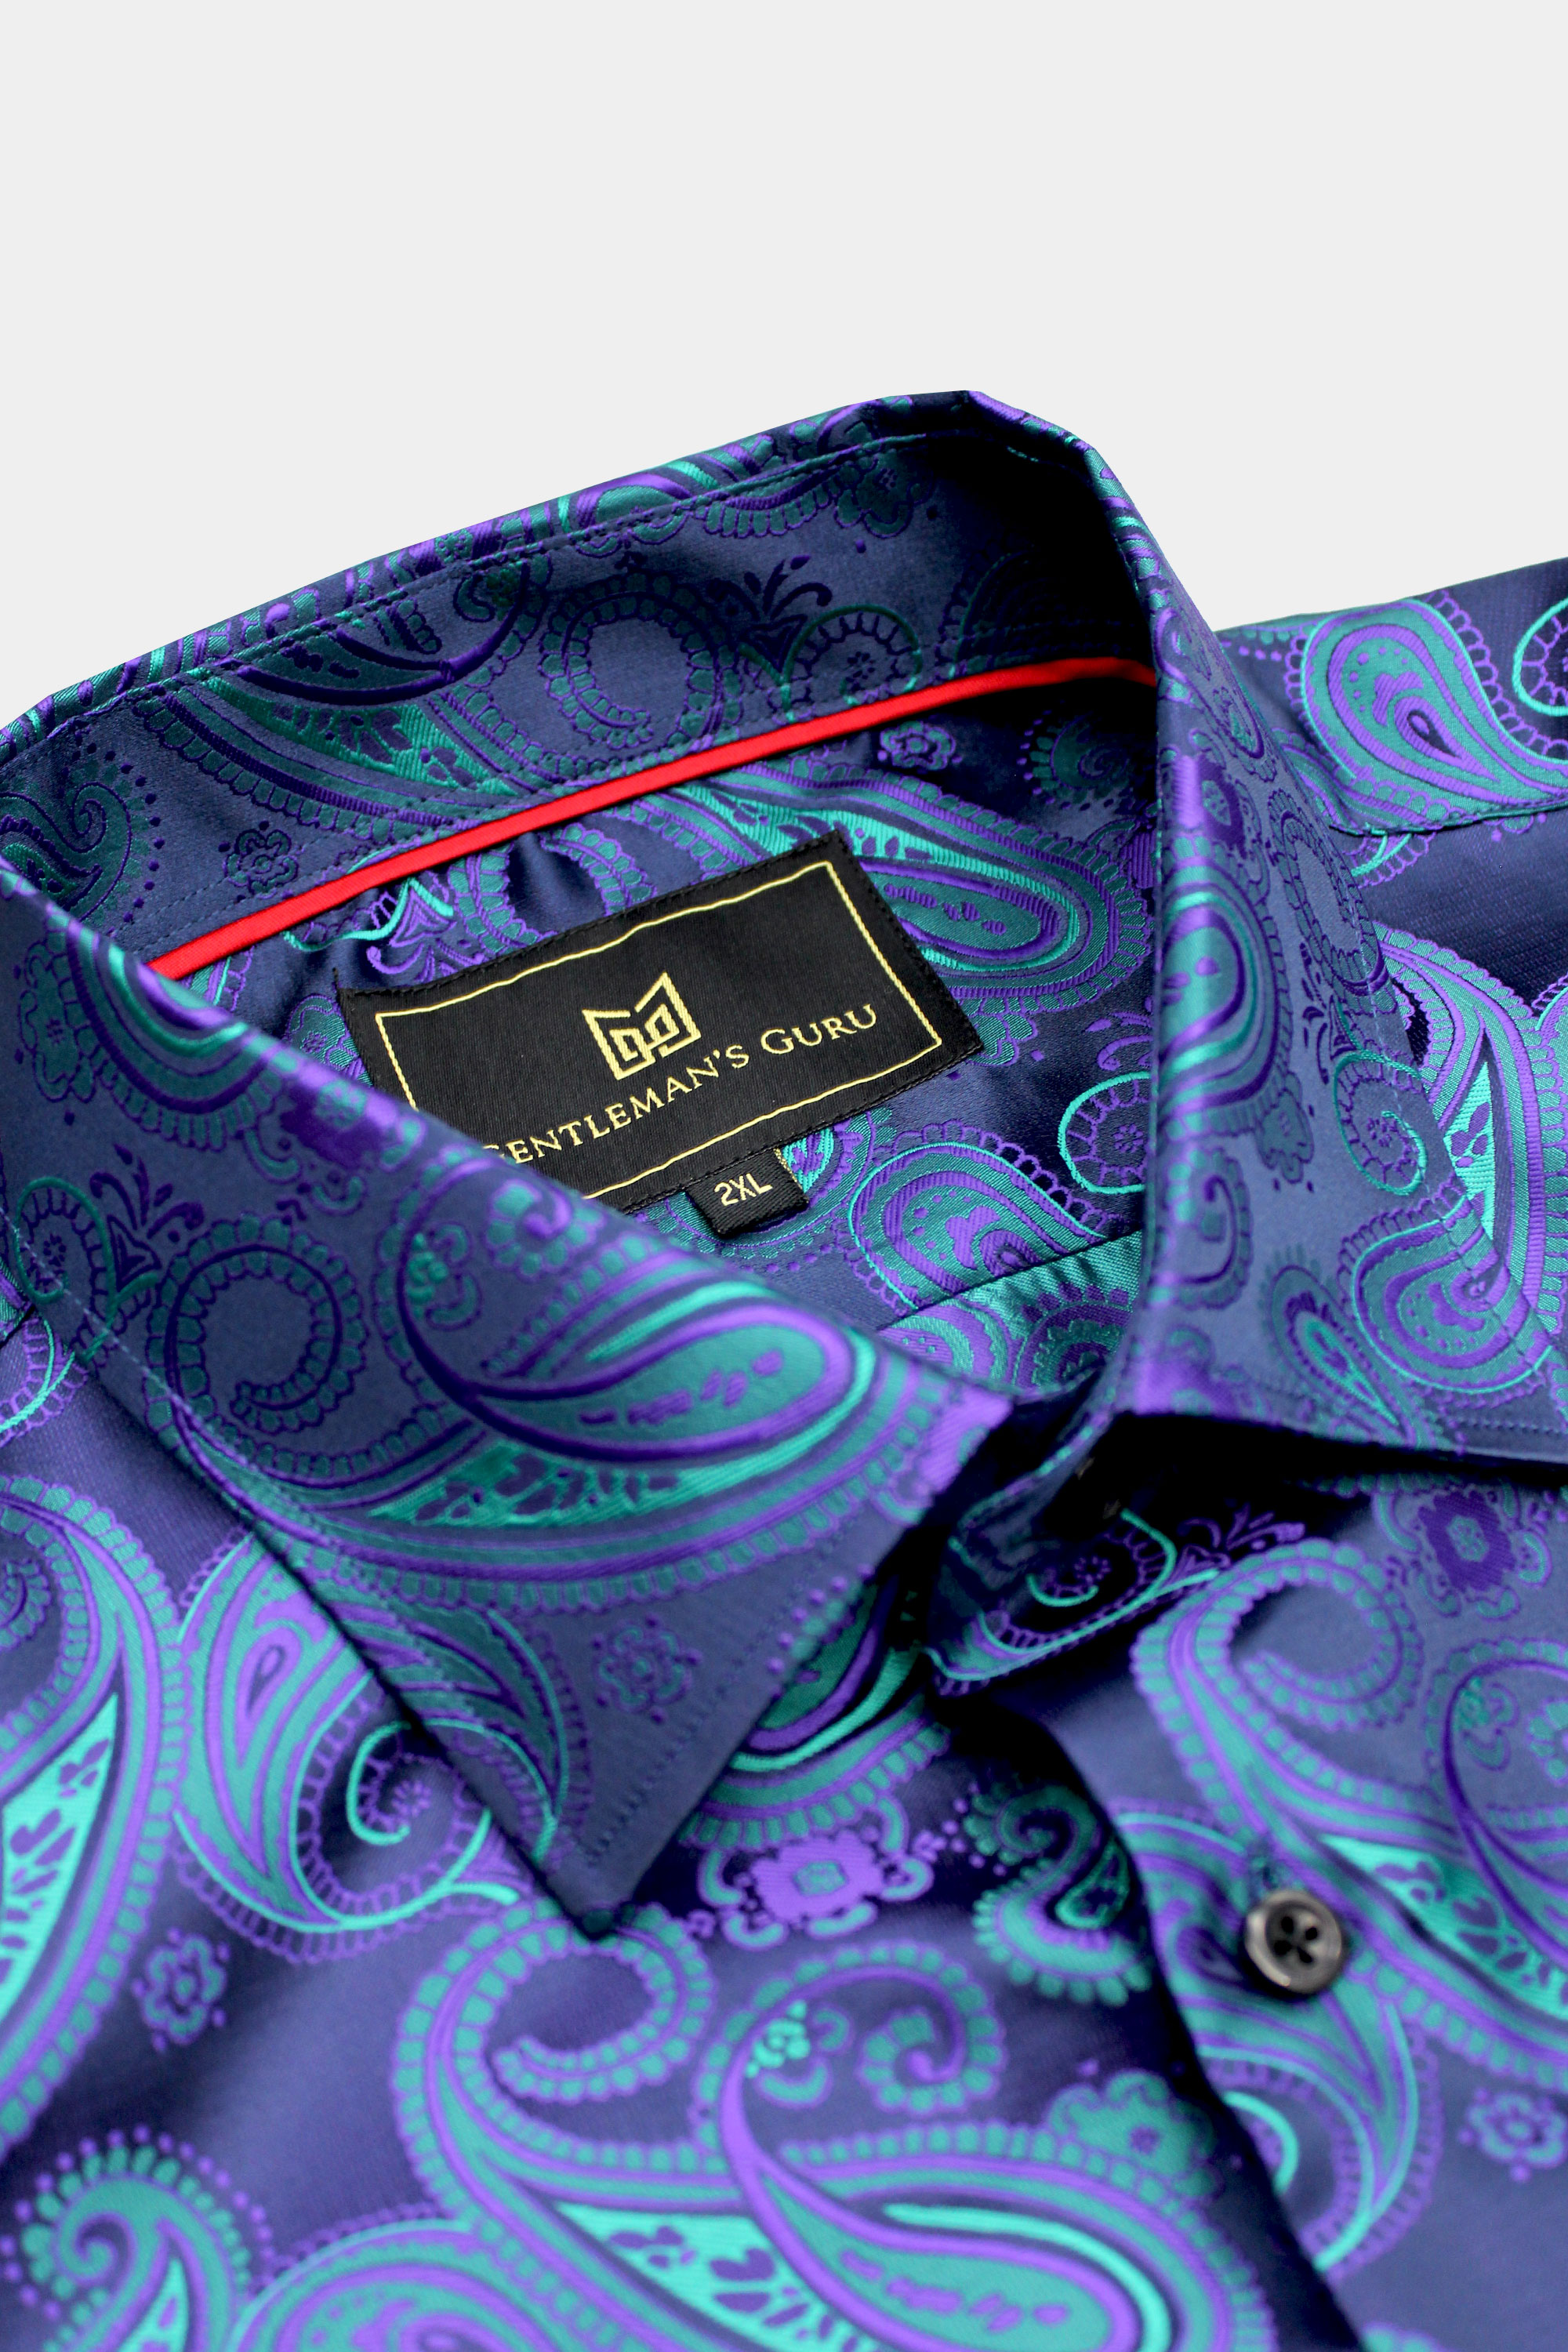 Mens-Exotic-Luxury-Long-Sleeve-Purple-and-Turquoise-Dress-Shirt-from-Gentlem